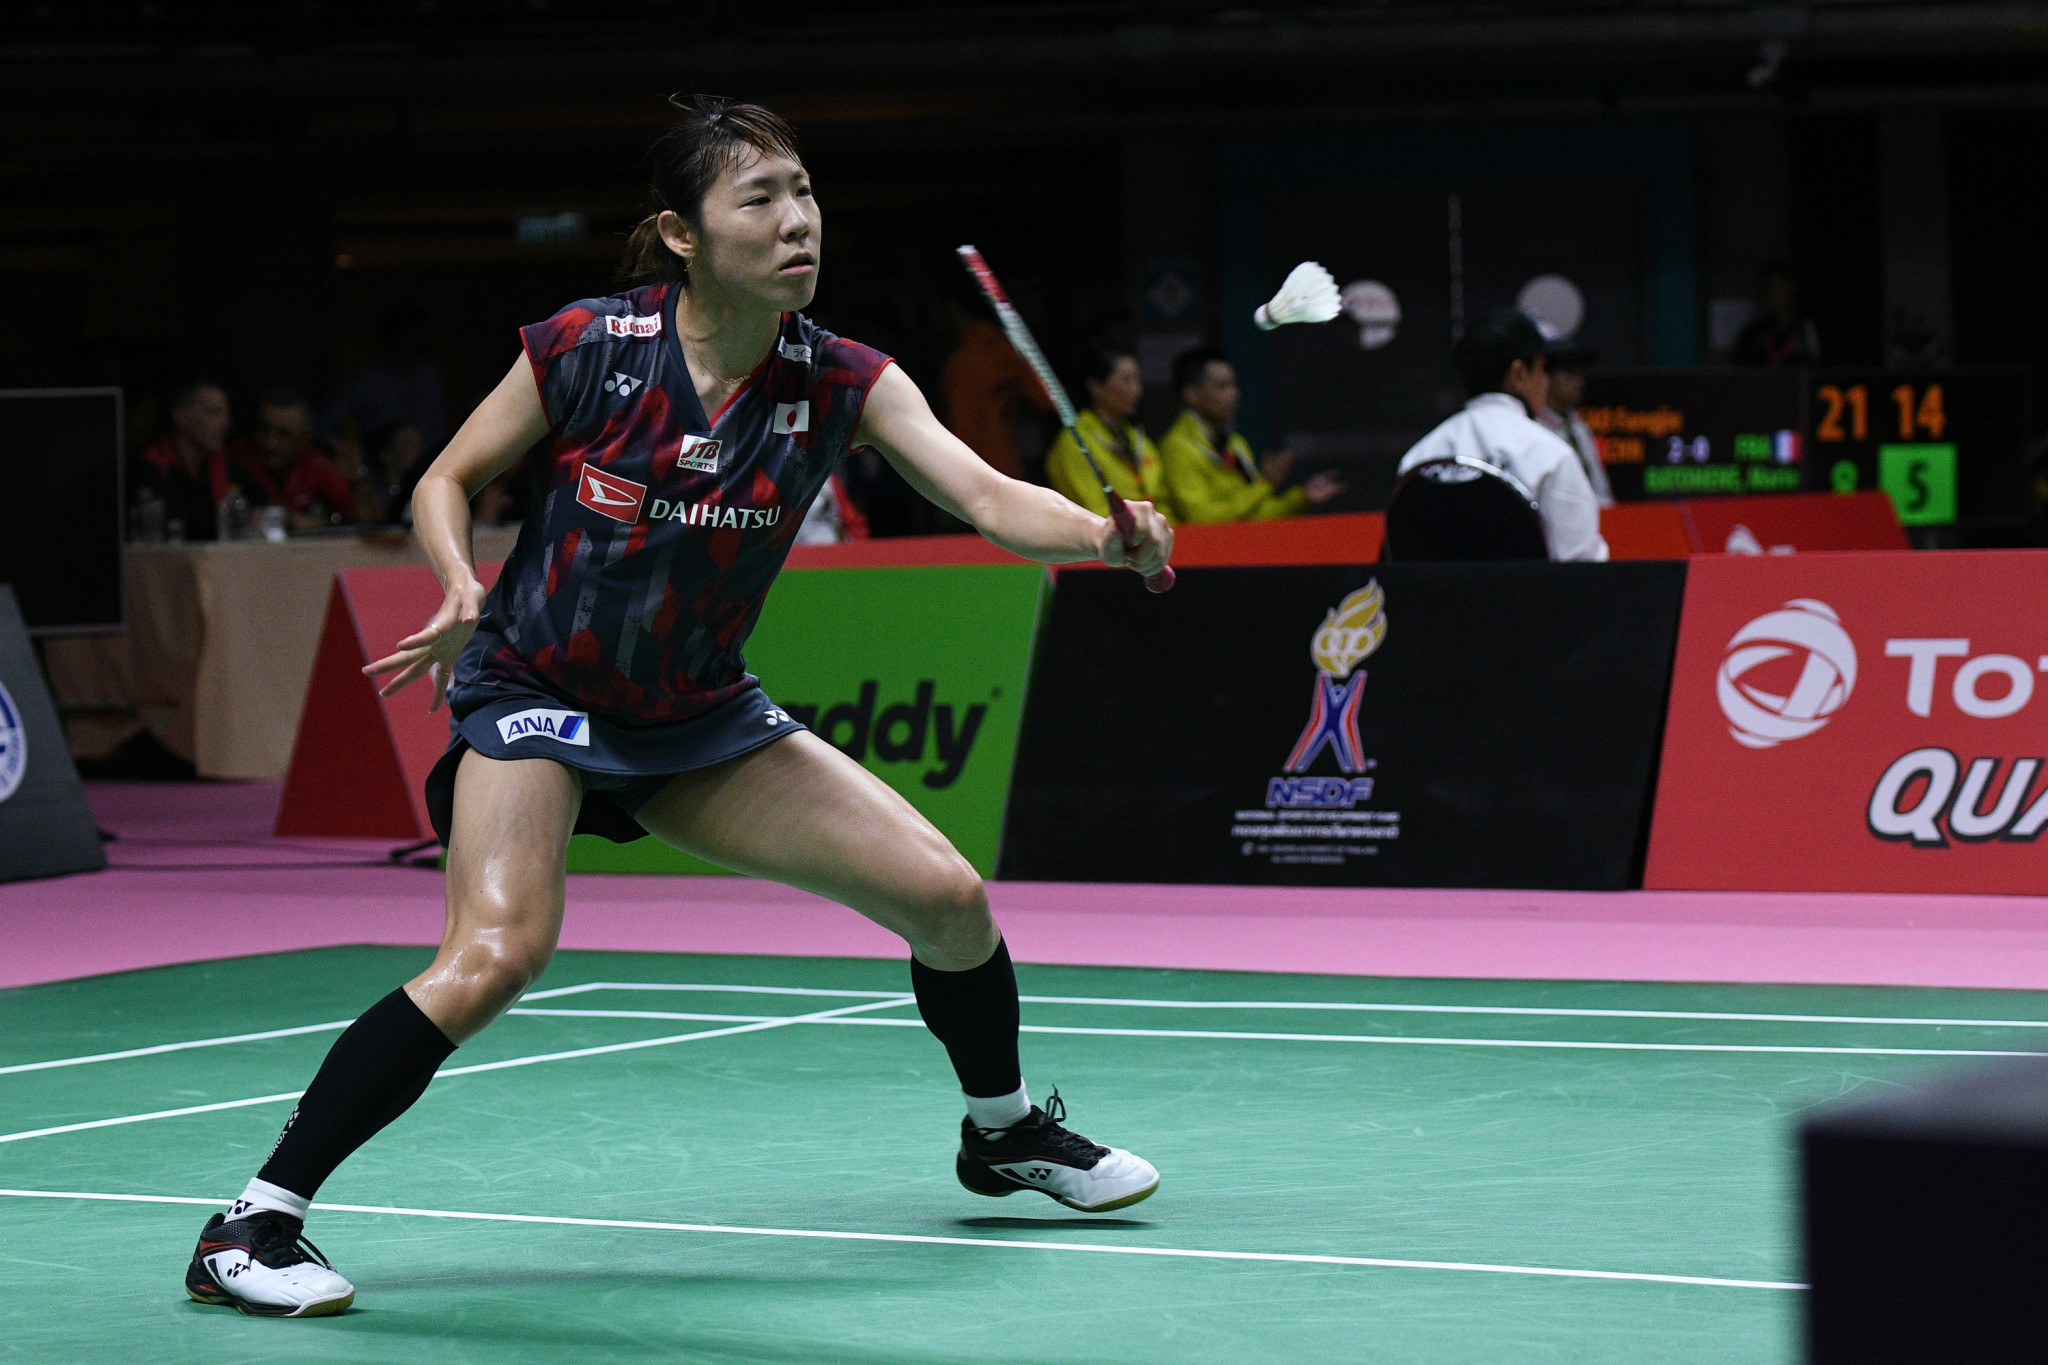 Sayaka Sato was beaten in the second round of the US Open Badminton Championships ©Getty Images